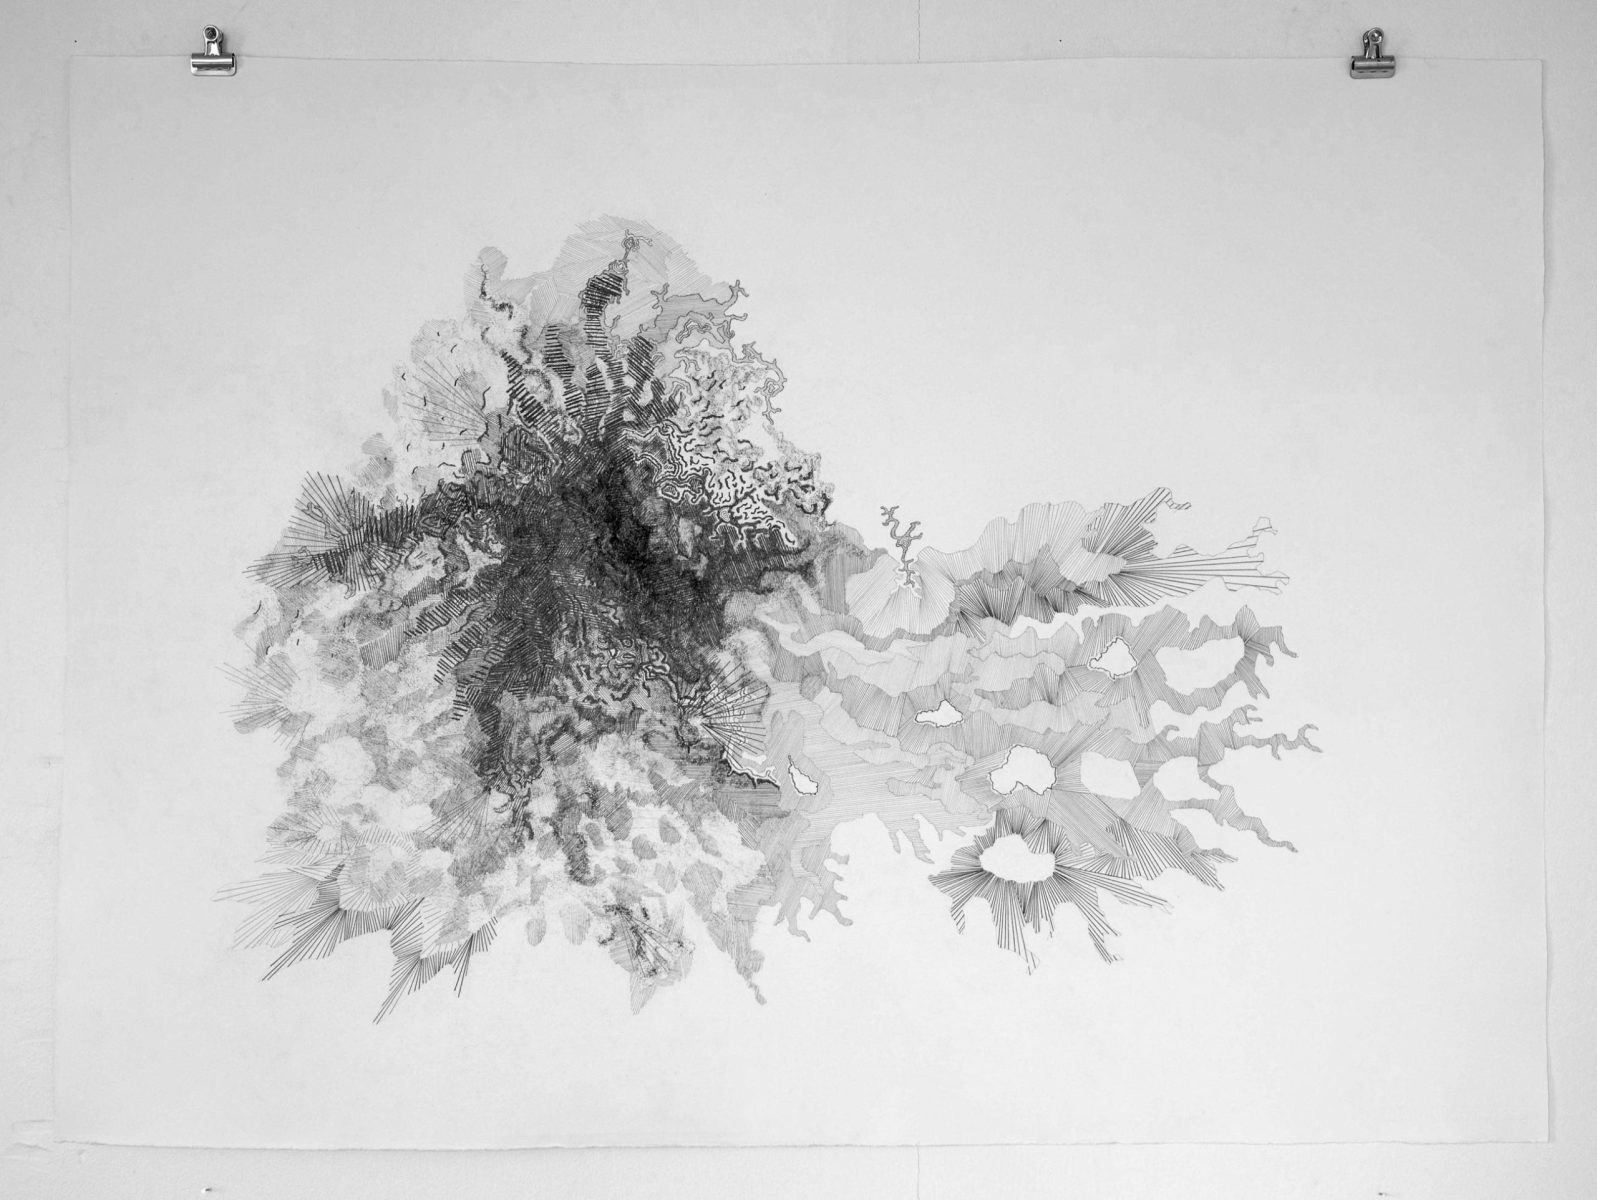 Explosion, teckning med blyerts,Explosion, drawing 2021 © Annelie Wallin.